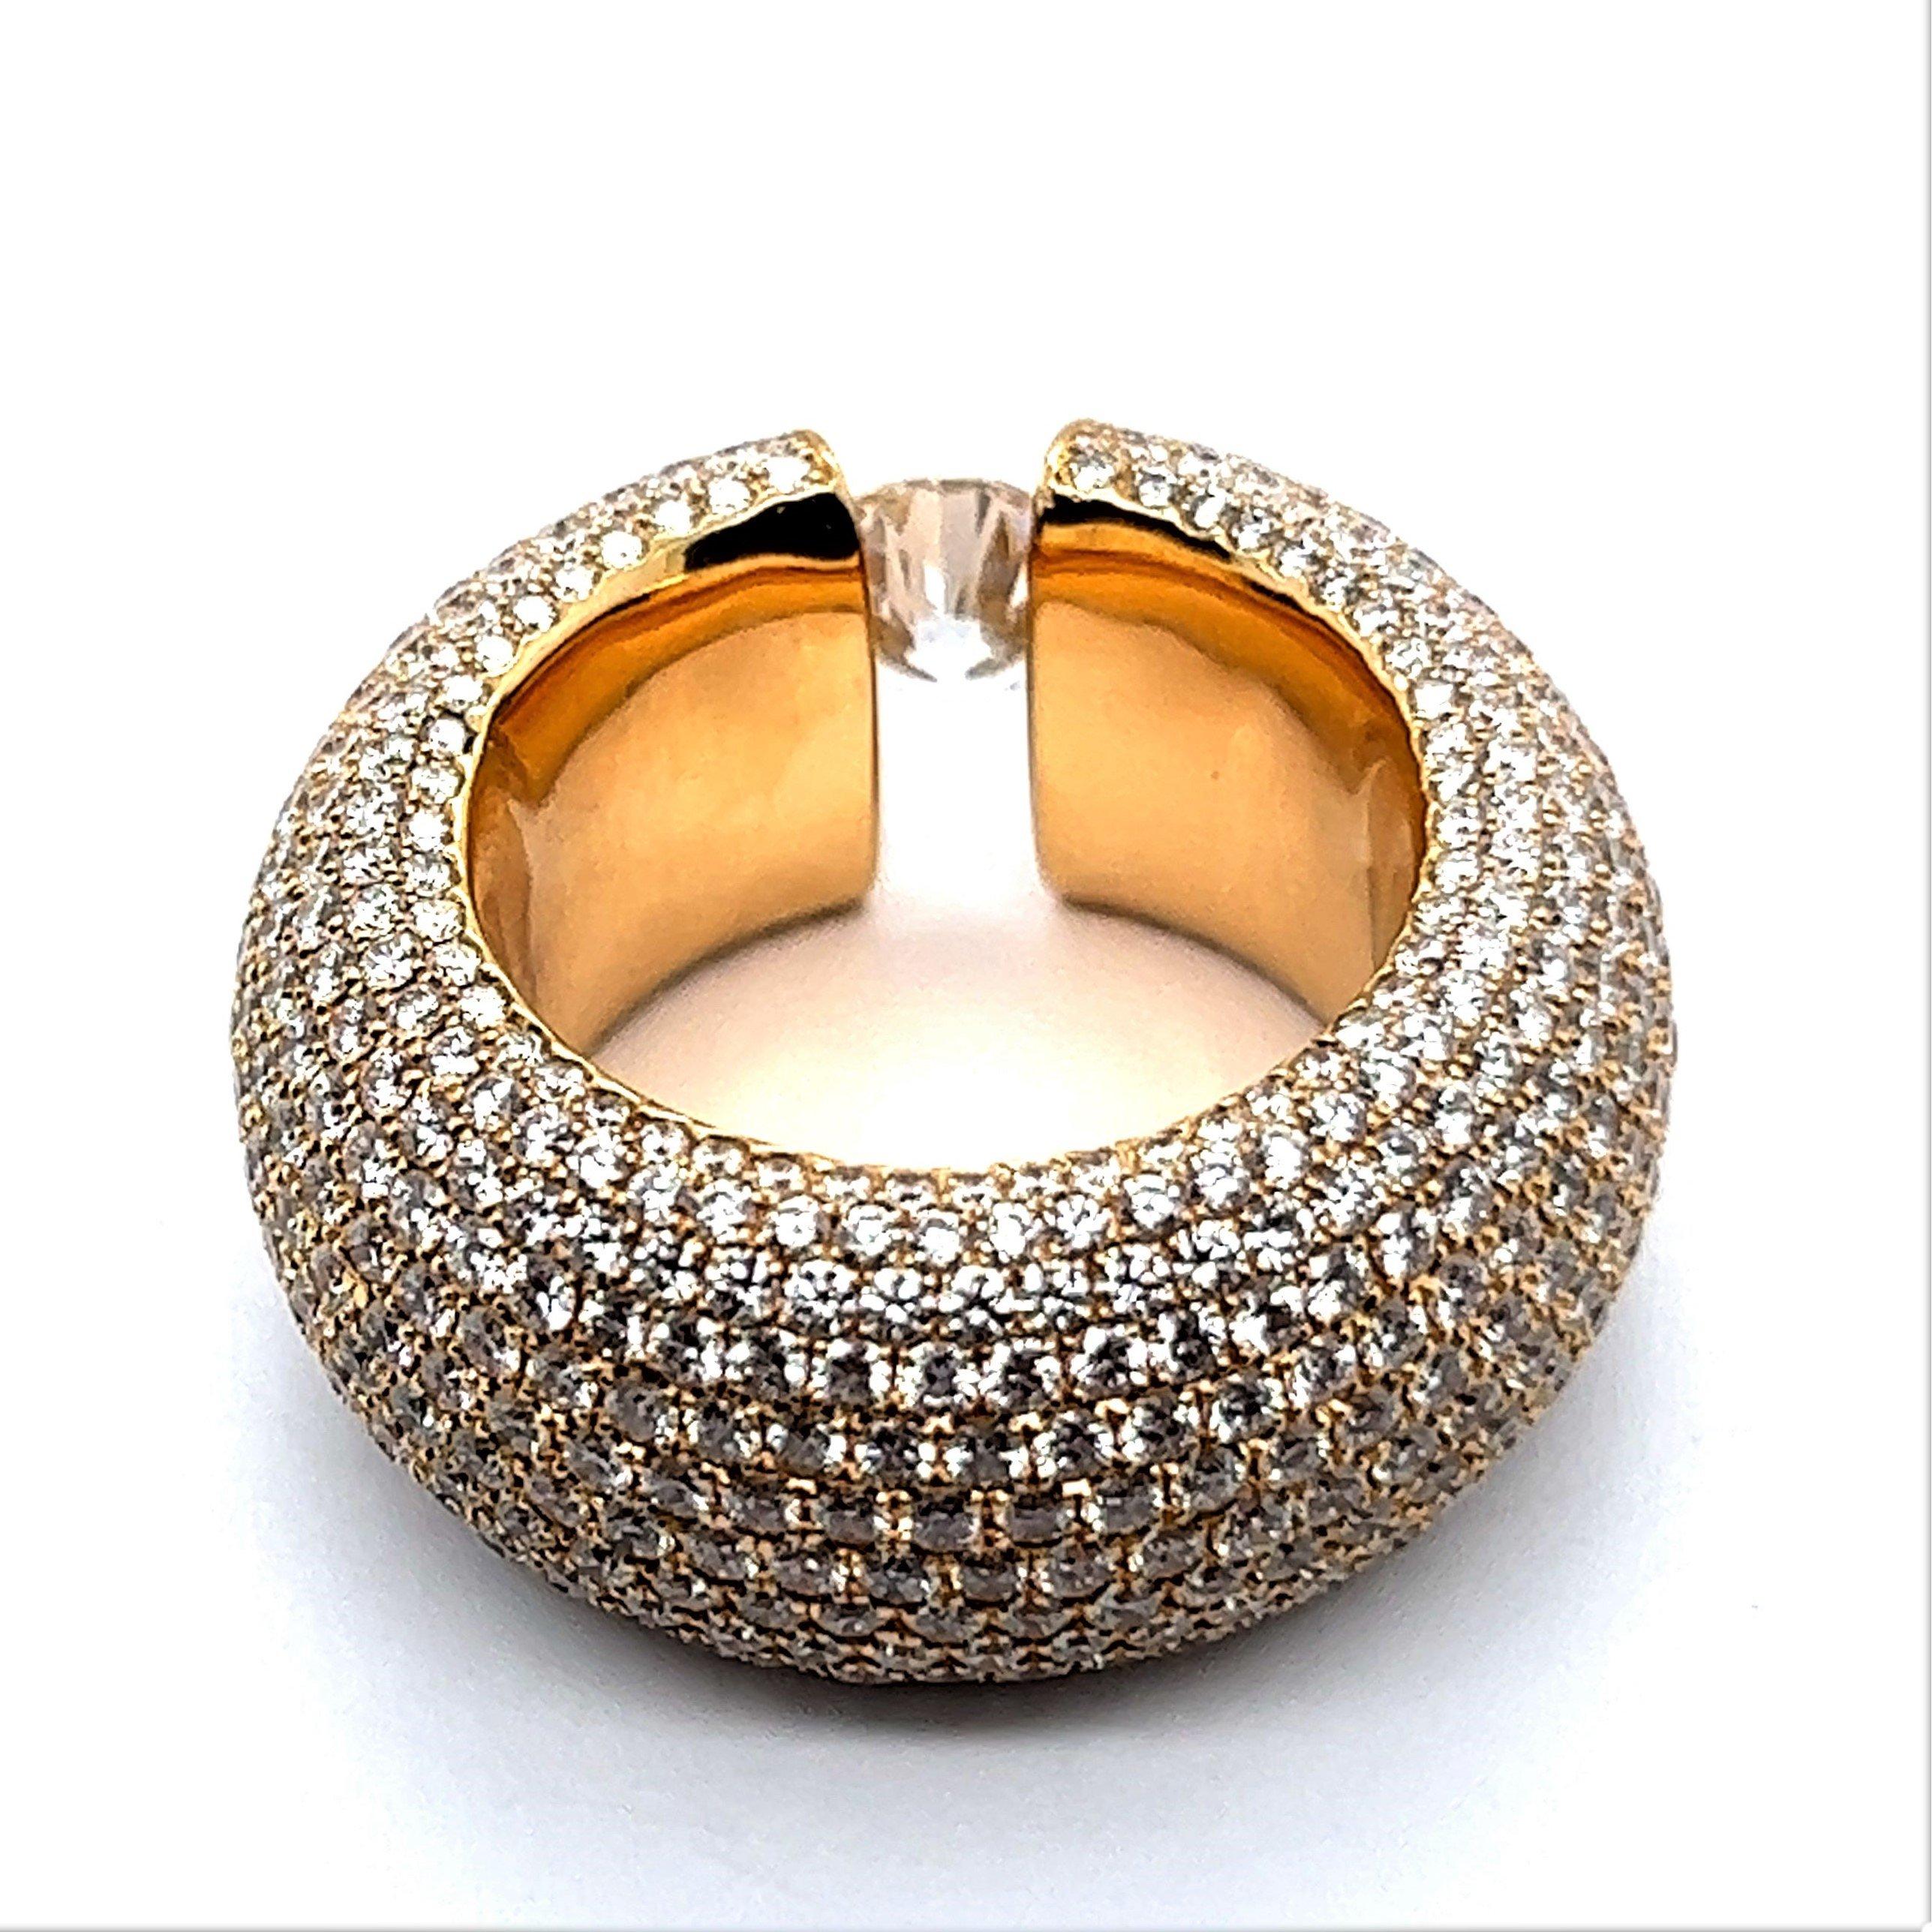 Glamorous Pave Diamond Ring in 18 Karat Yellow Gold In Excellent Condition For Sale In Lucerne, CH